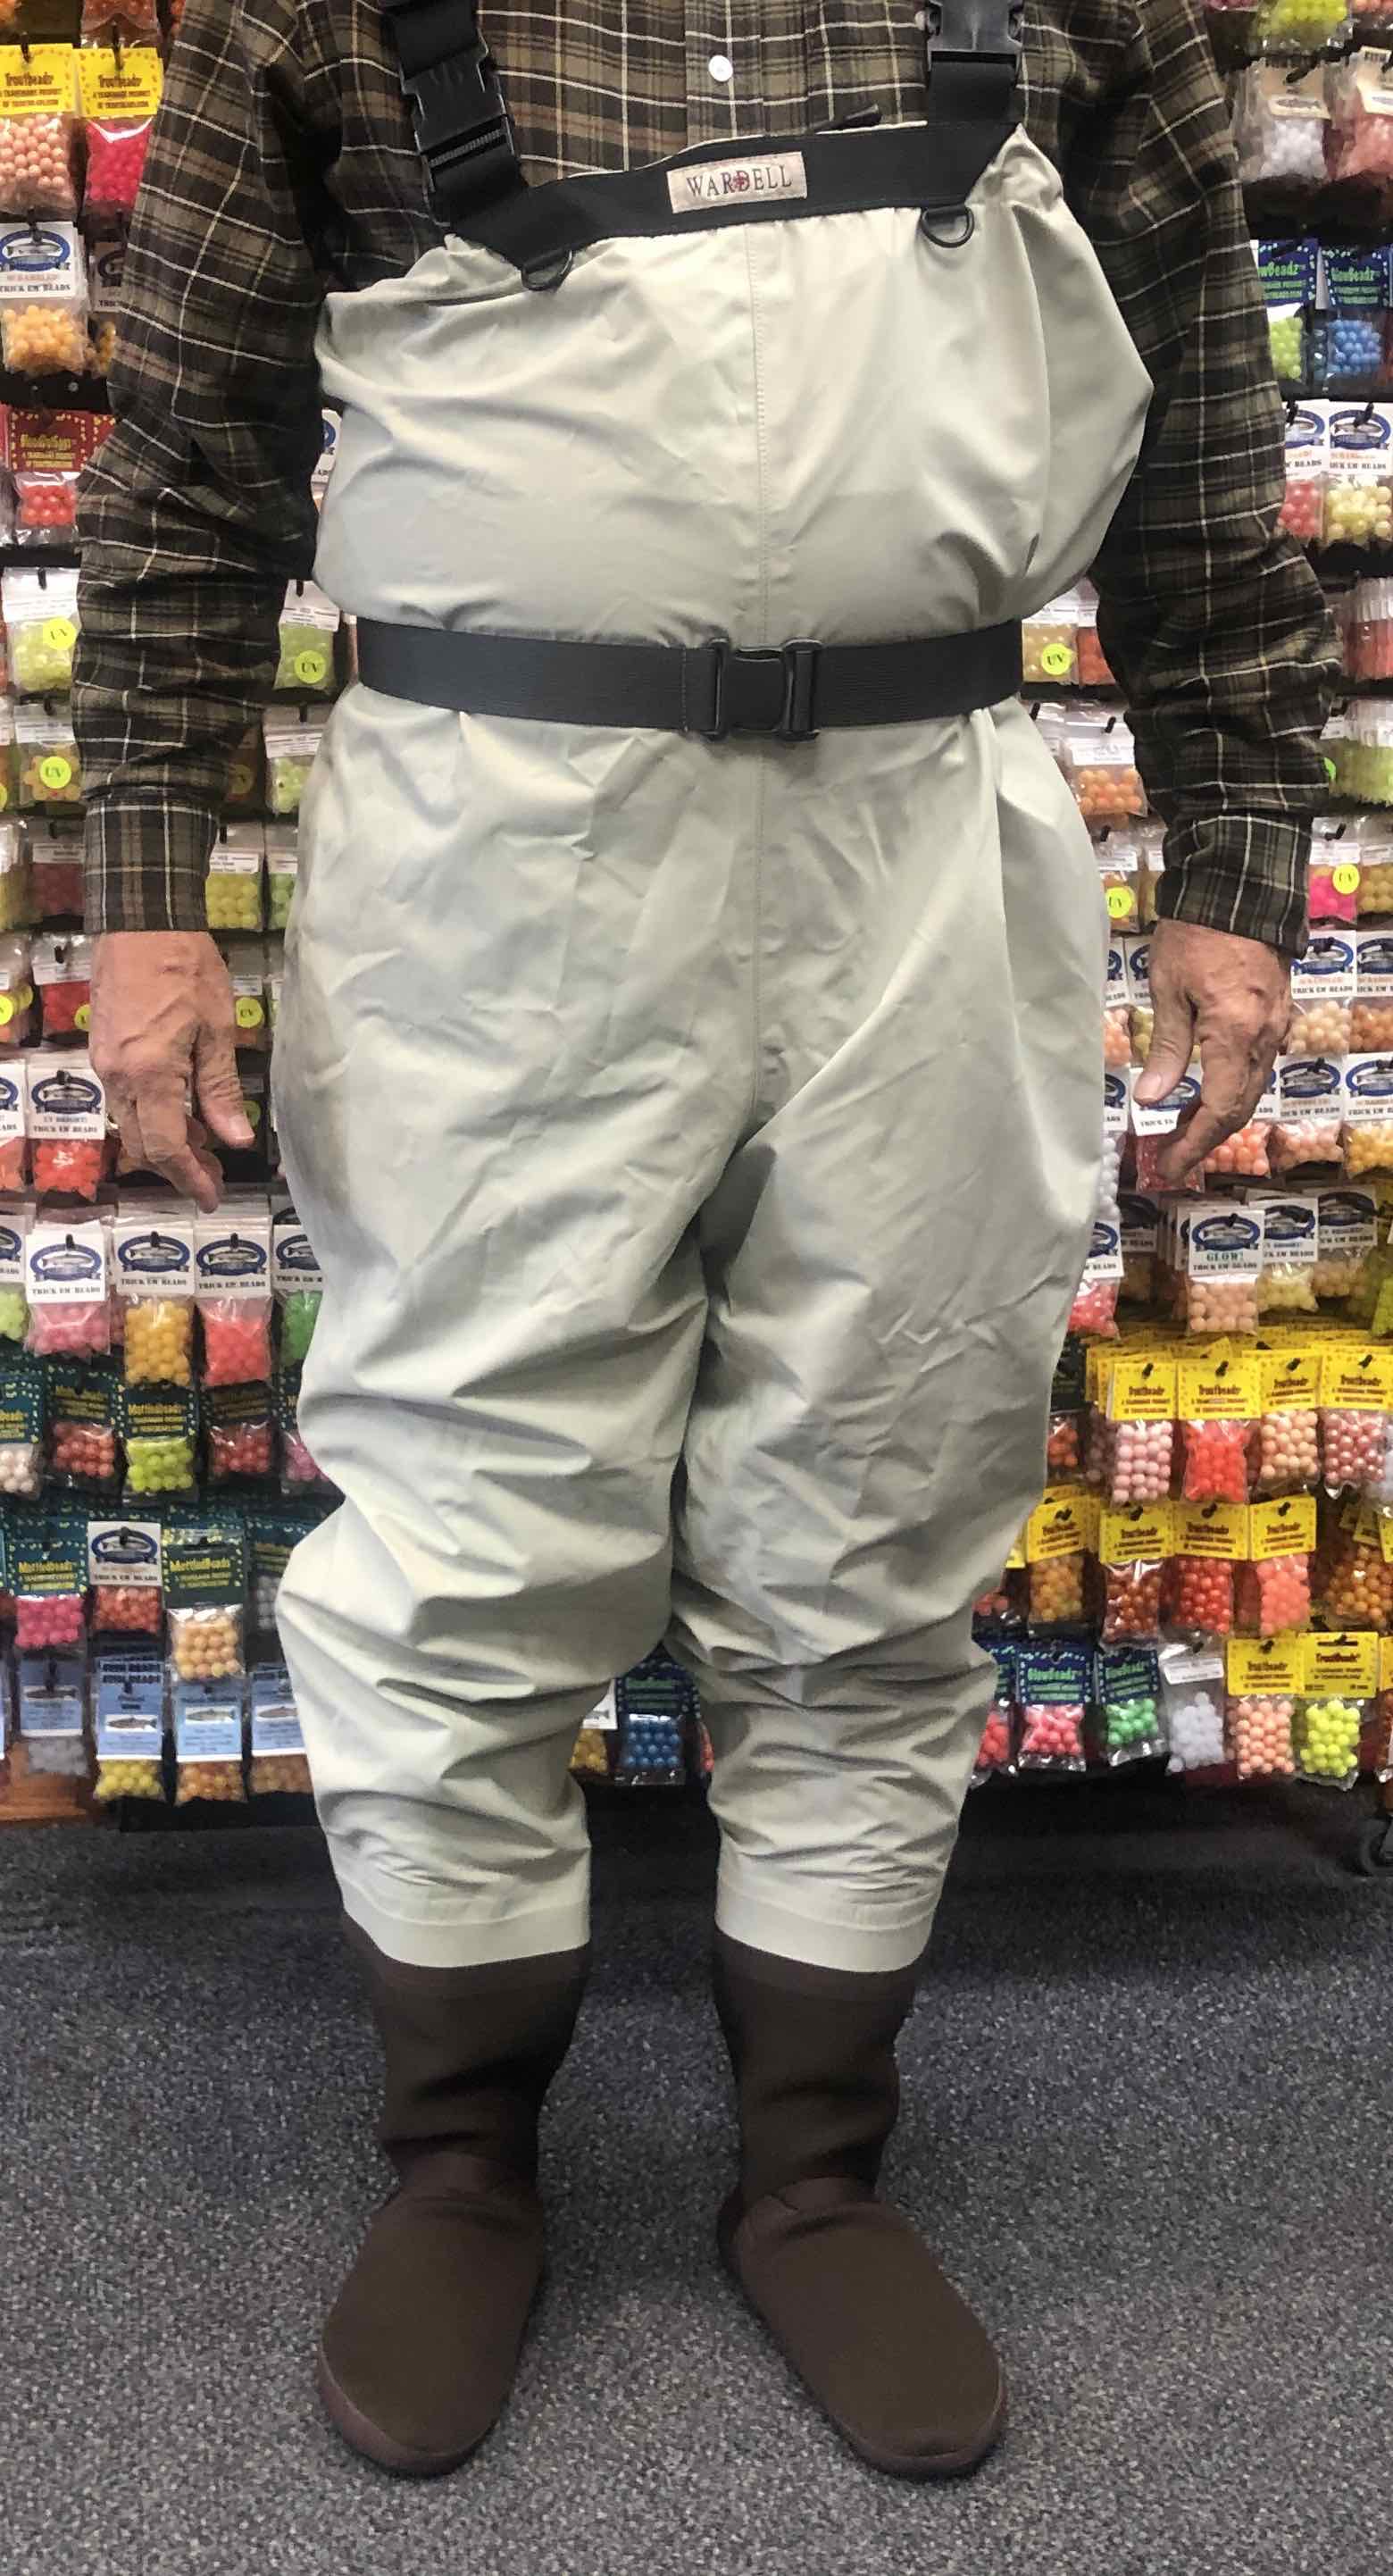 Springbrook Wardell Breathable Waders - Size Medium - NEVER USED!